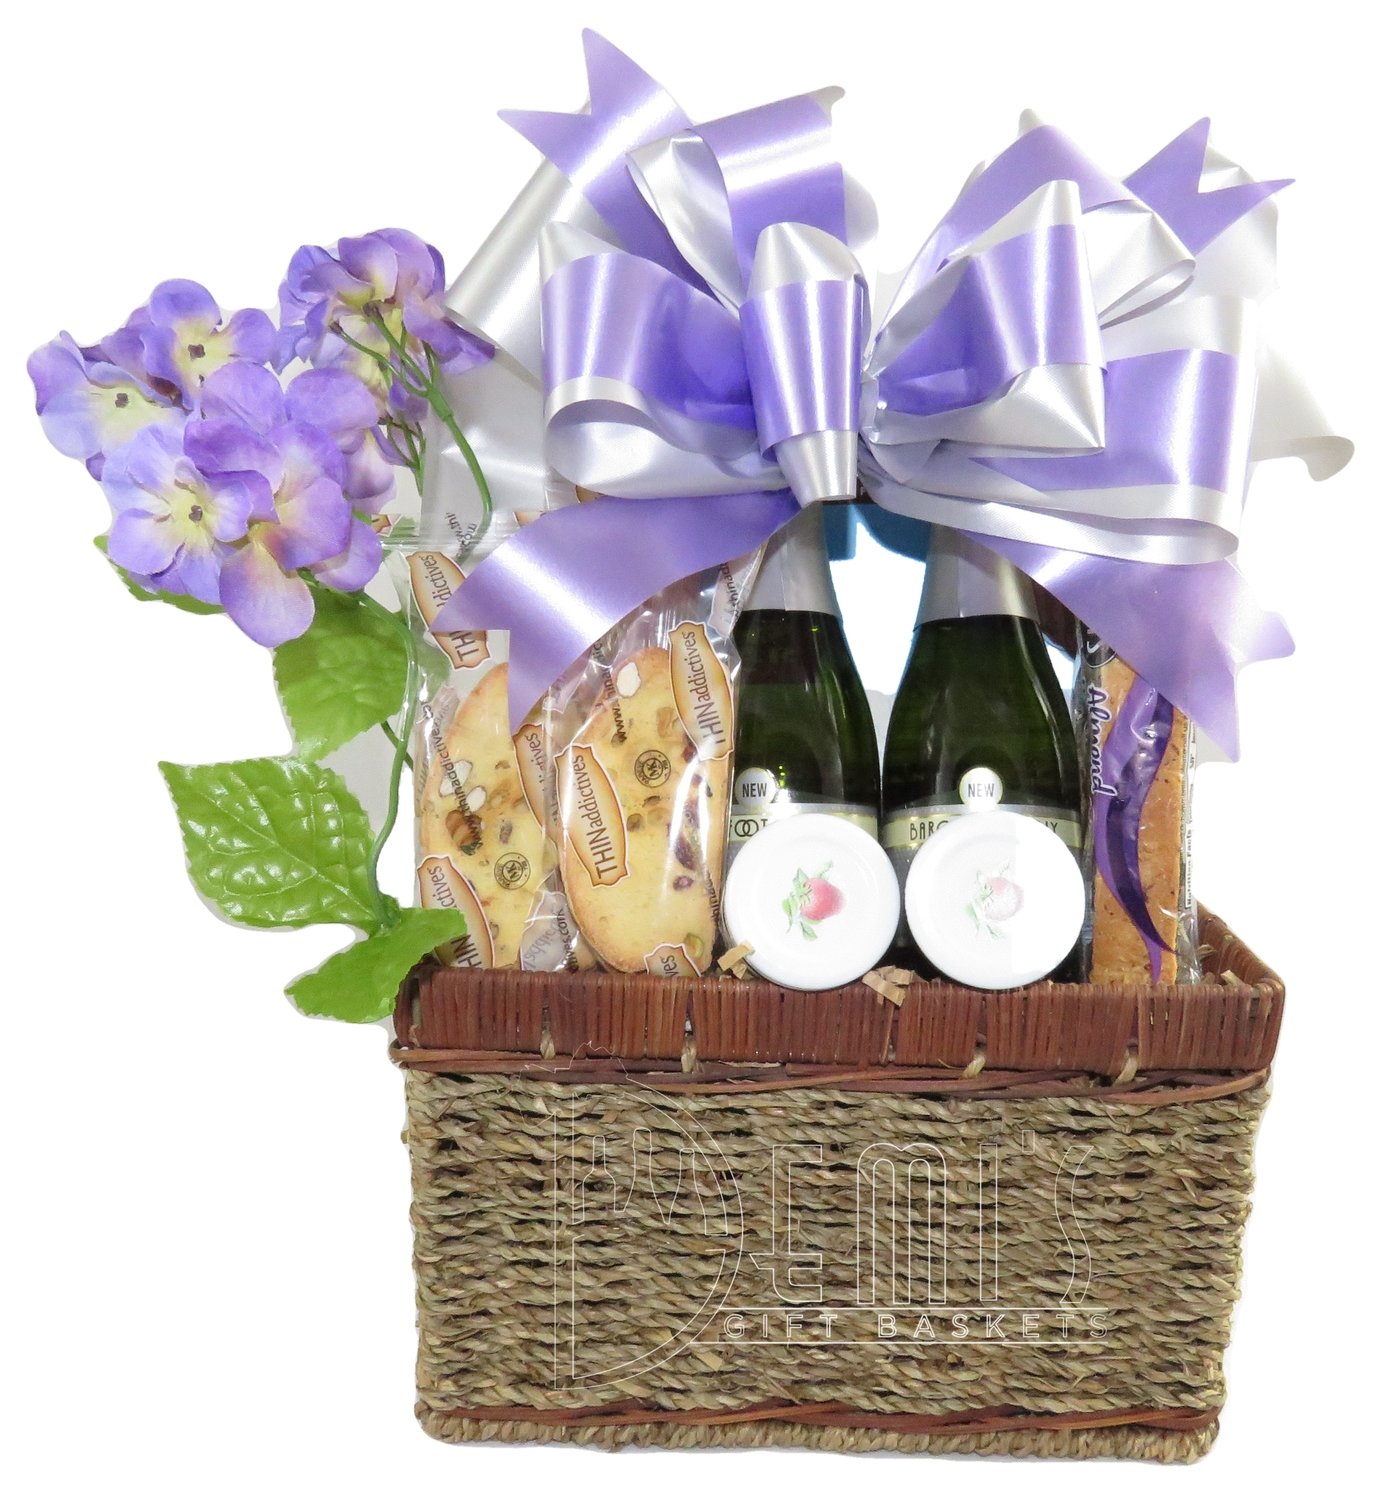 Morning Mimosa Gift Basket | Baskets By Price 2 | Custom Gift Baskets